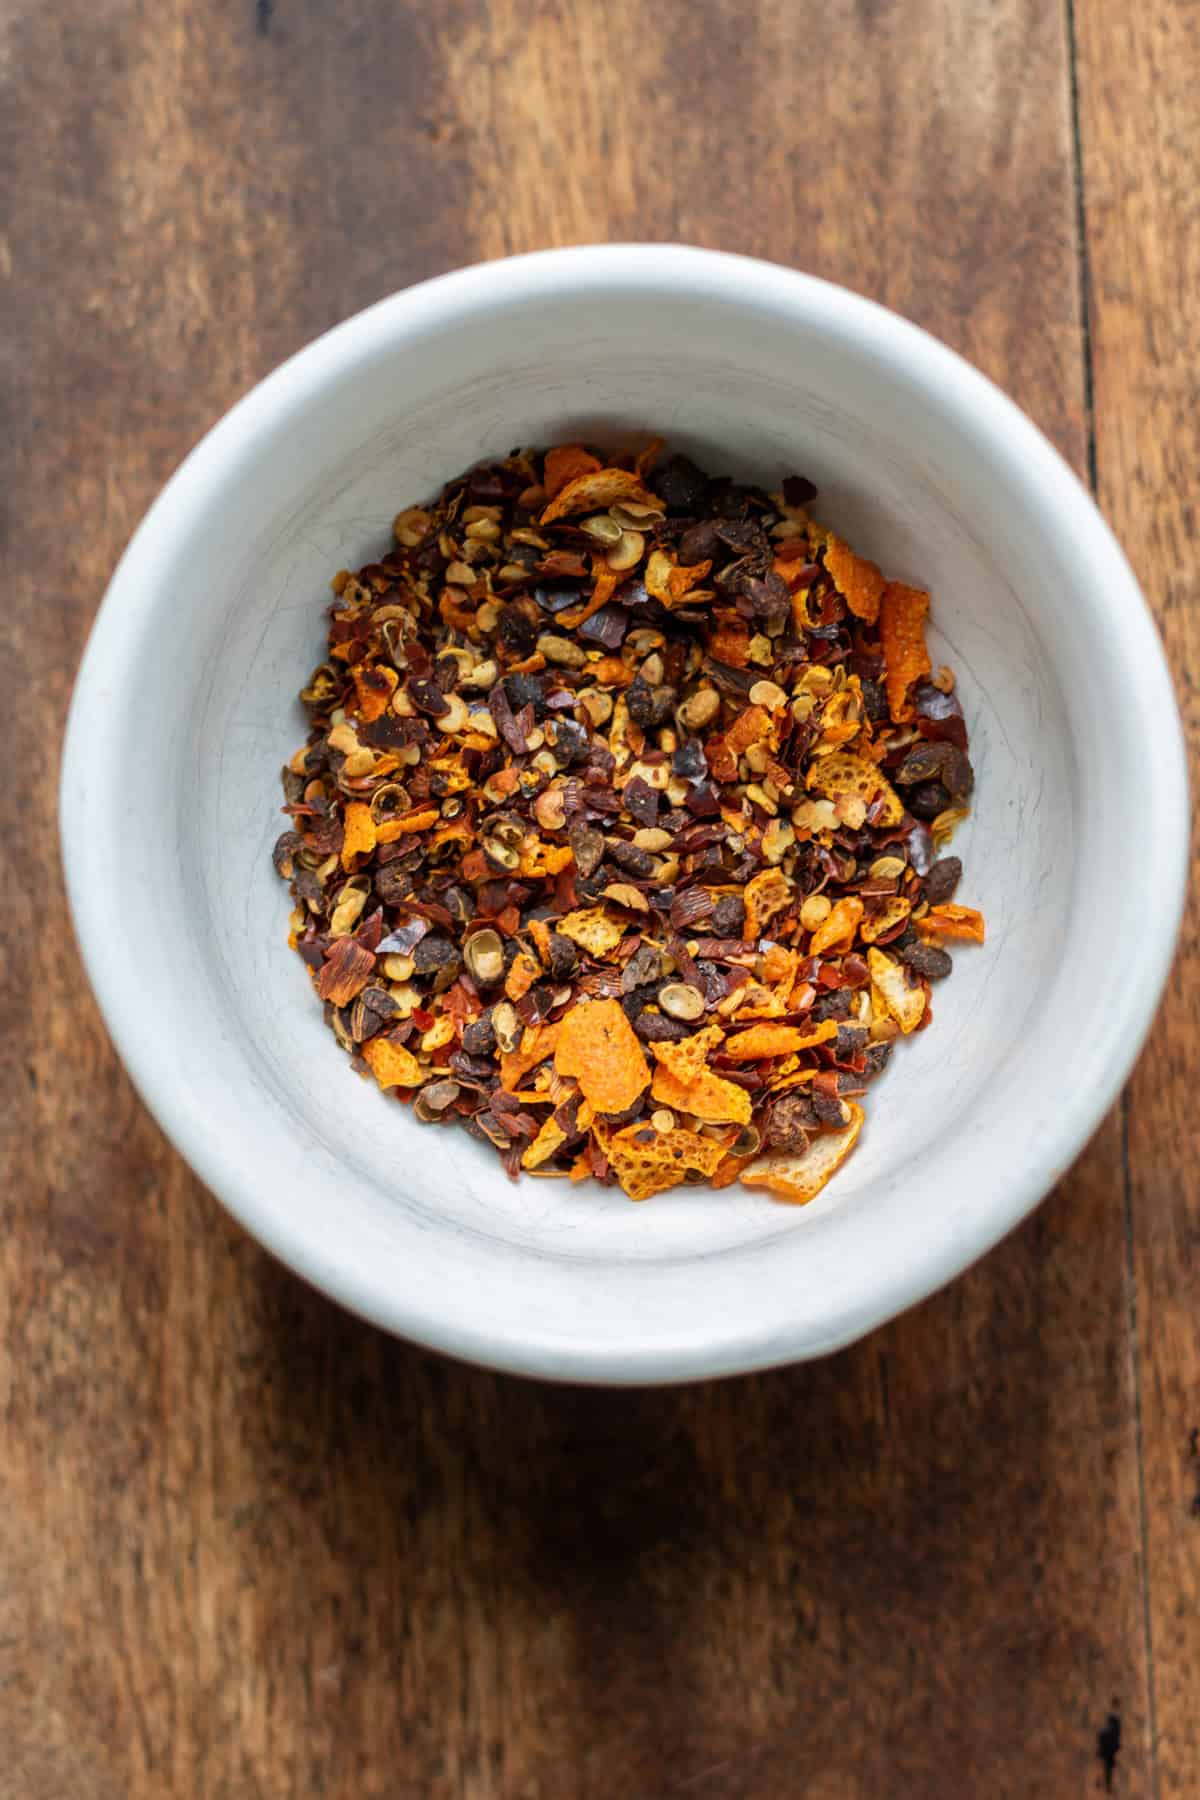 Peppercorns, chili flakes and dried orange peel in a dish.